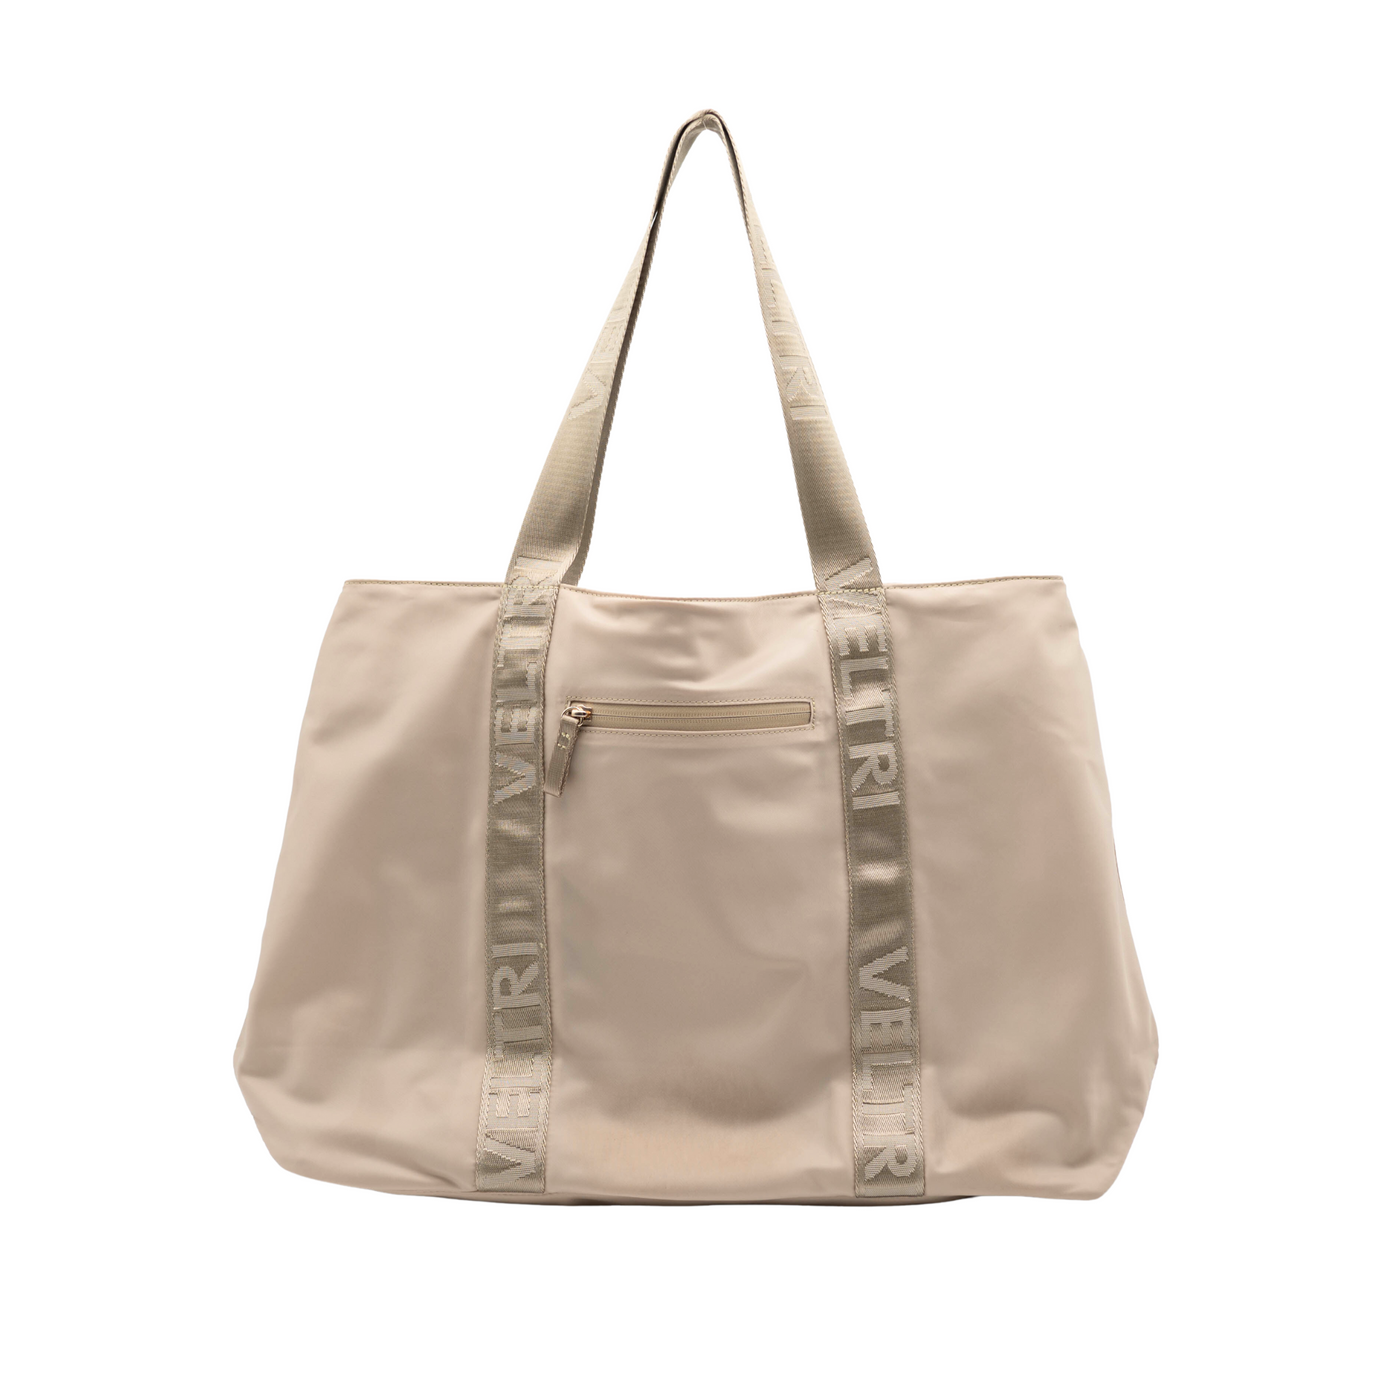 Newport Tote - Sand  "NEW!"         Back in Stock!